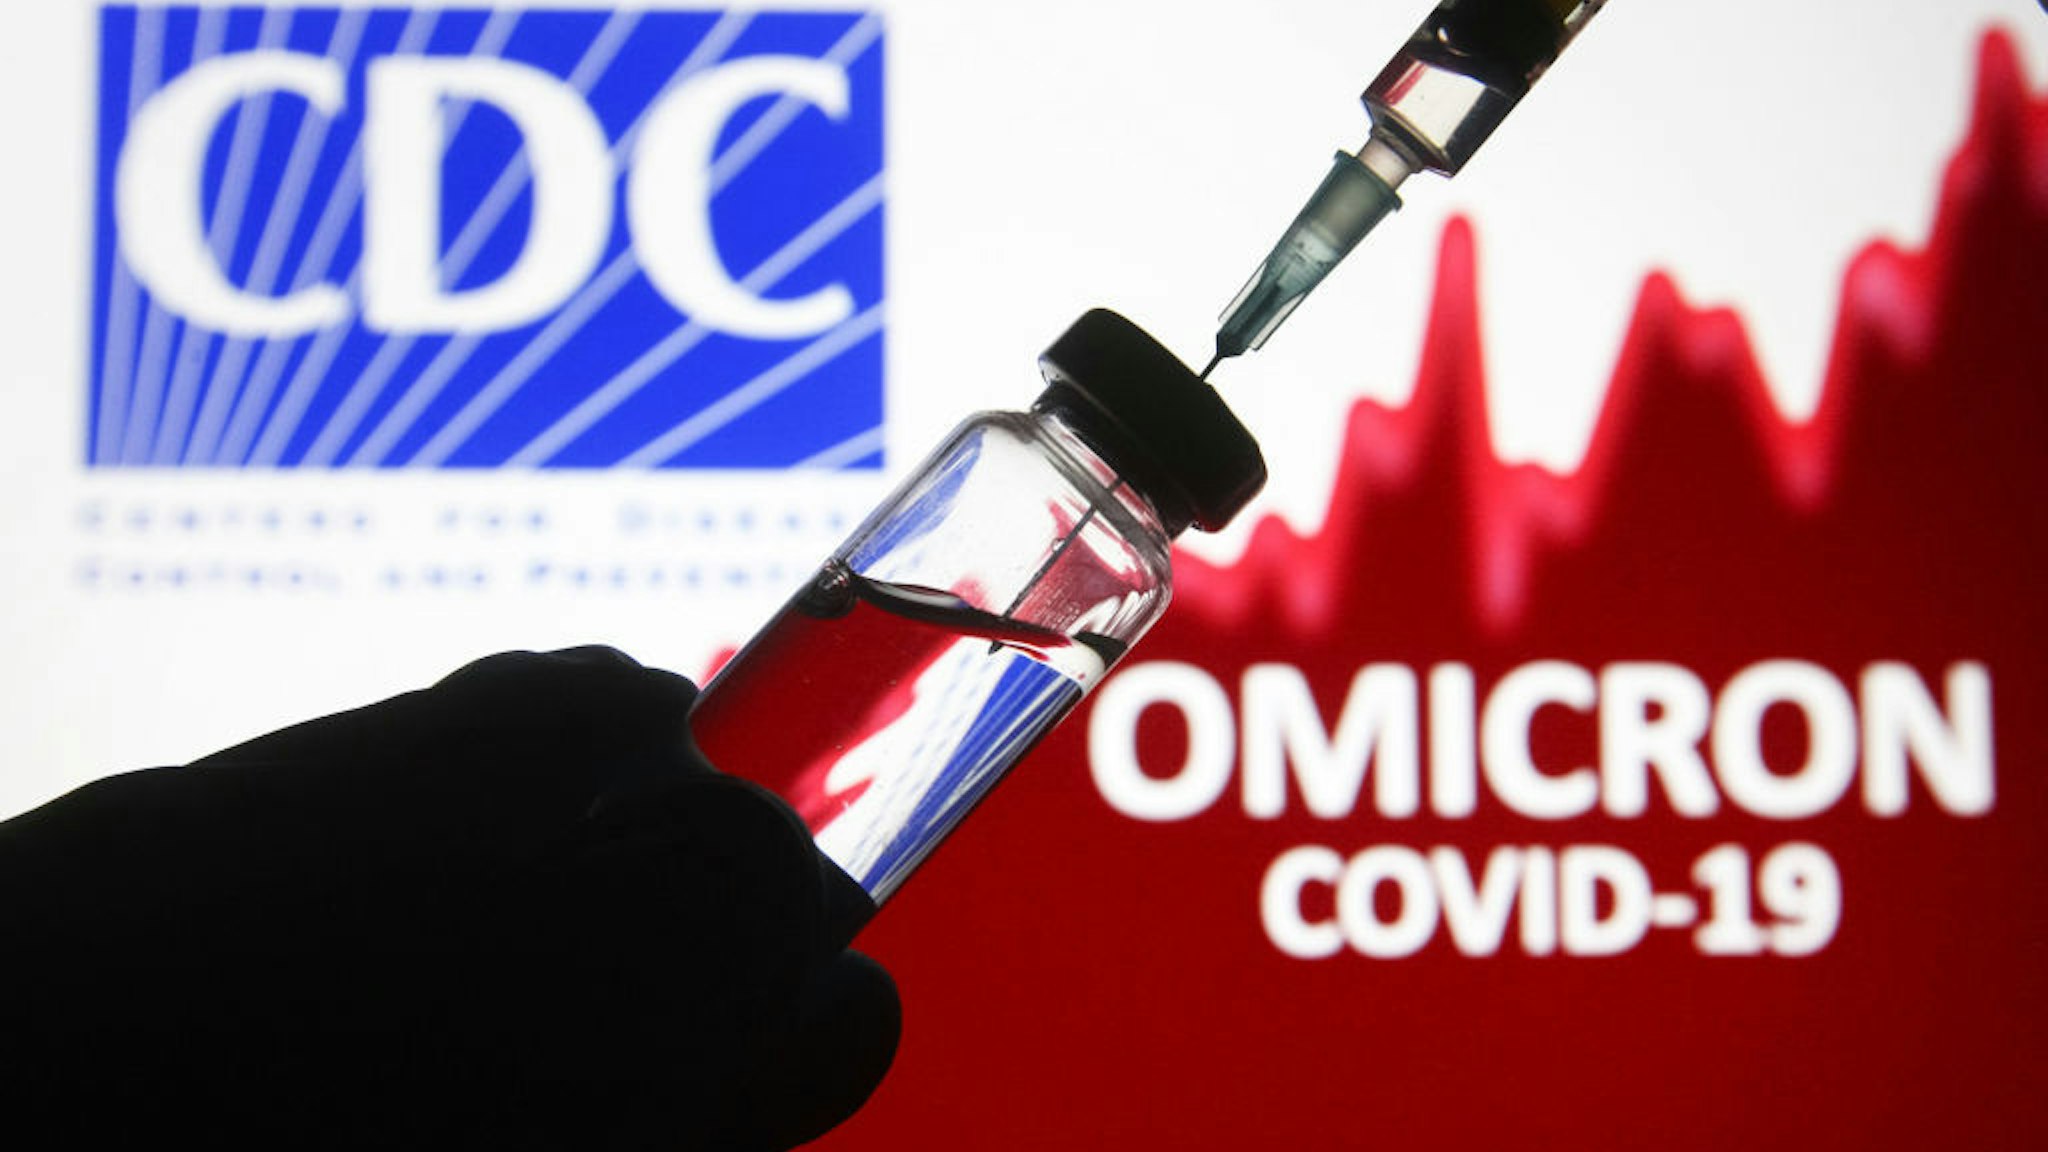 UKRAINE - 2021/12/05: In this photo illustration, a hand extracting a dose of vaccine from a vial is seen in front of the words Omicron covid-19 with a logo of CDC in the background.